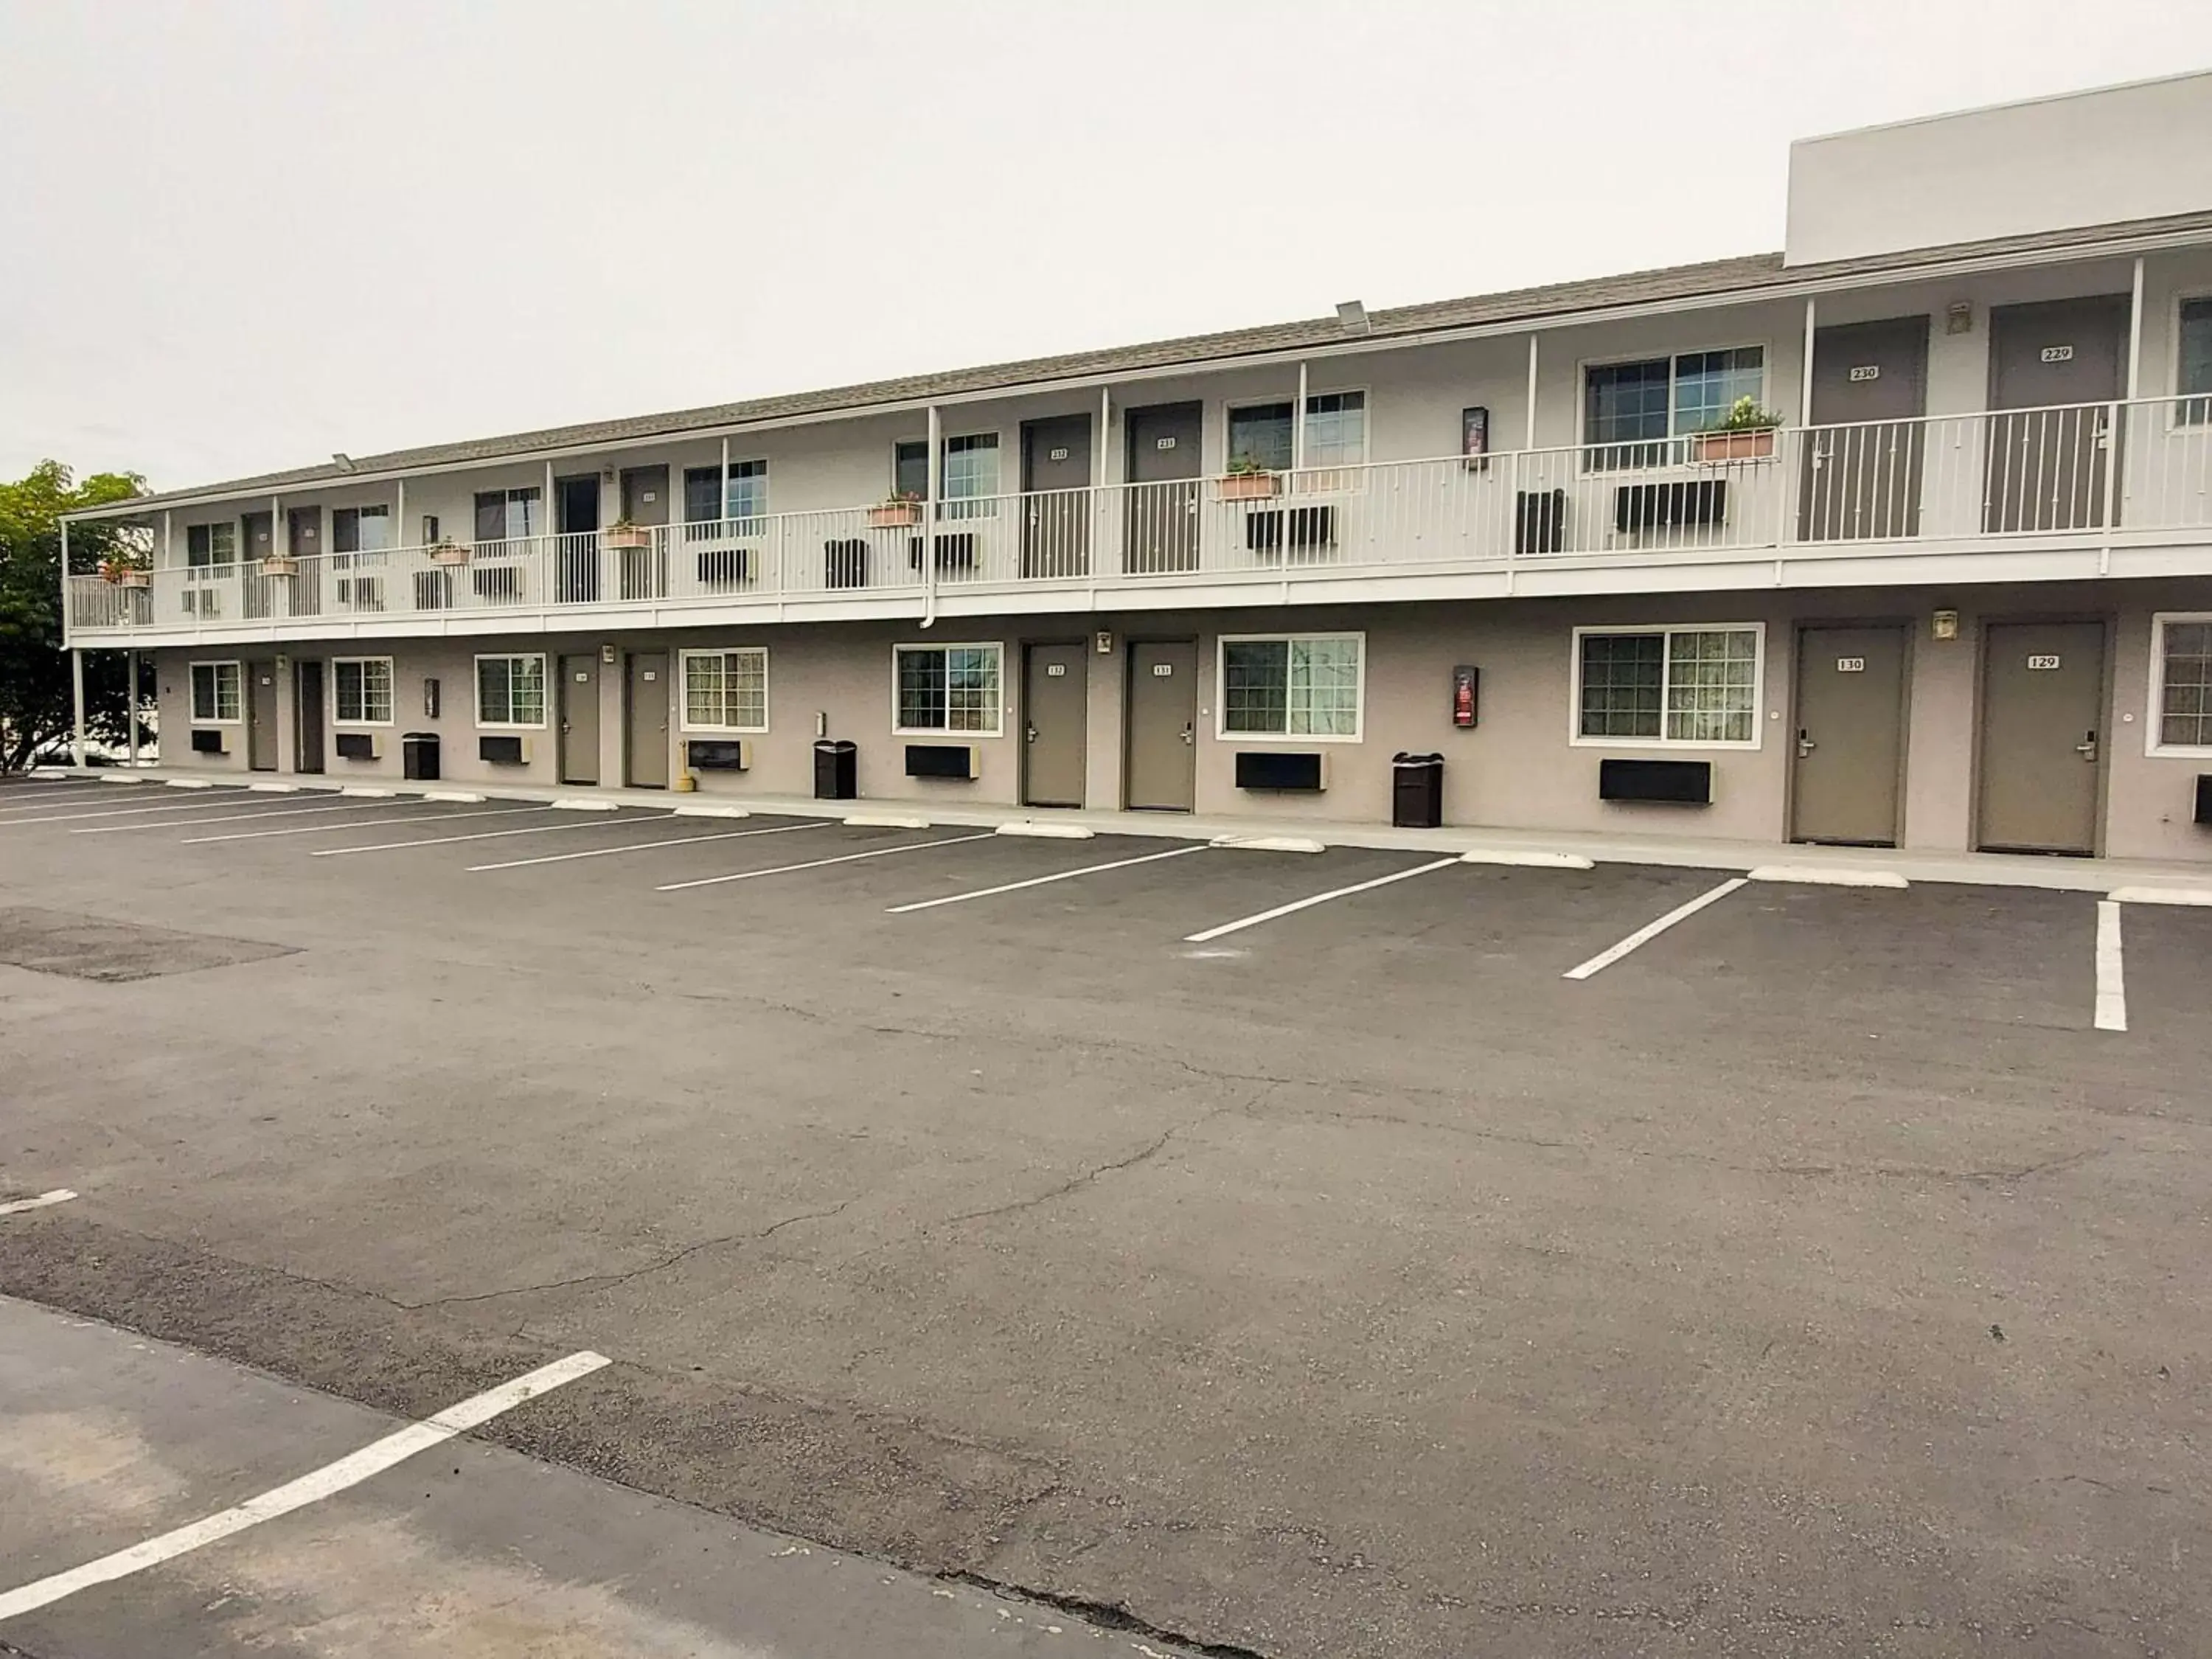 Property Building in Studio 6-National City, CA - Naval Base San Diego